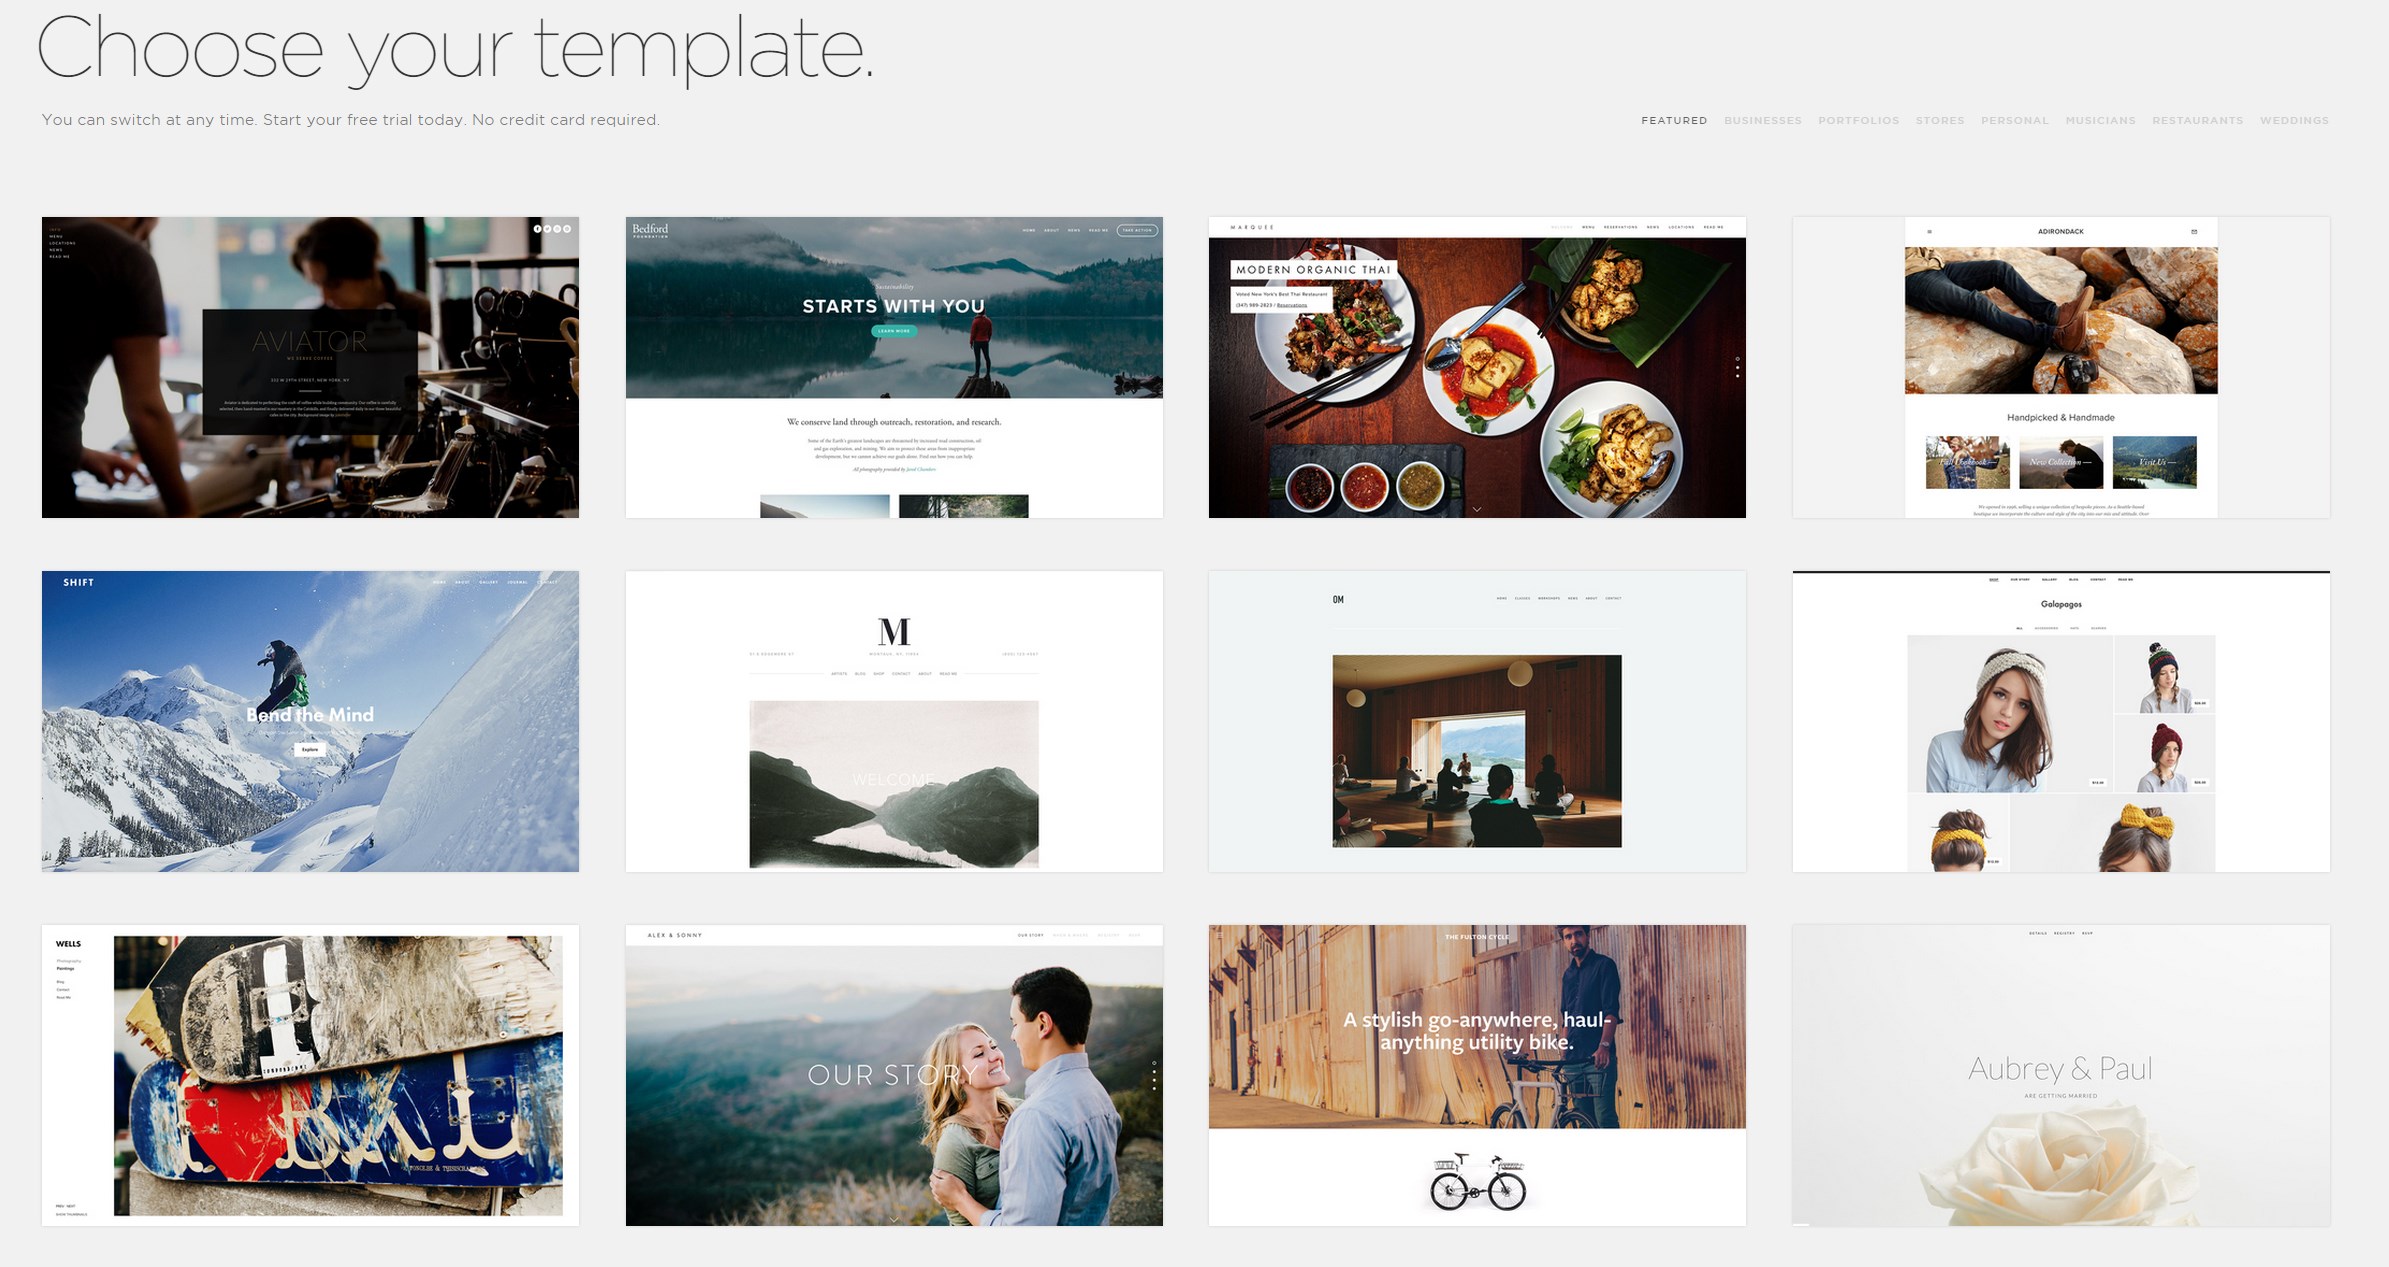 squarespace-for-photographers-pros-and-cons-slr-lounge